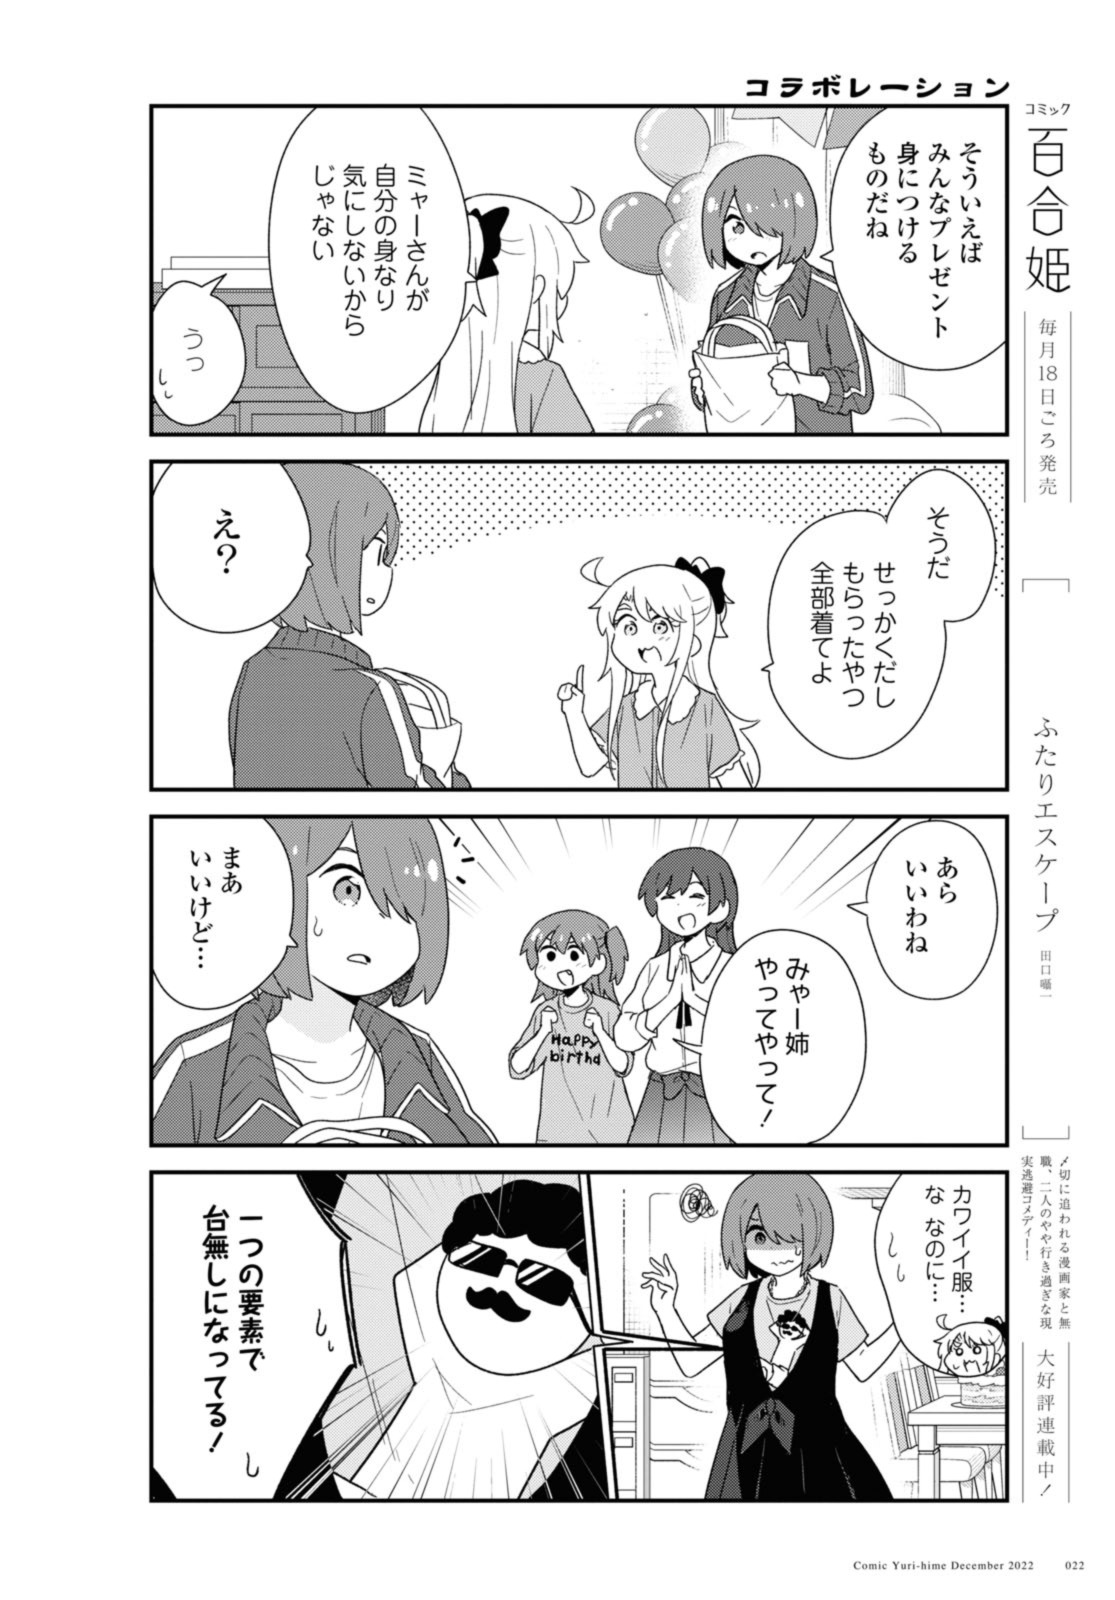 Wataten! An Angel Flew Down to Me 私に天使が舞い降りた！ 第100.2話 - Page 4